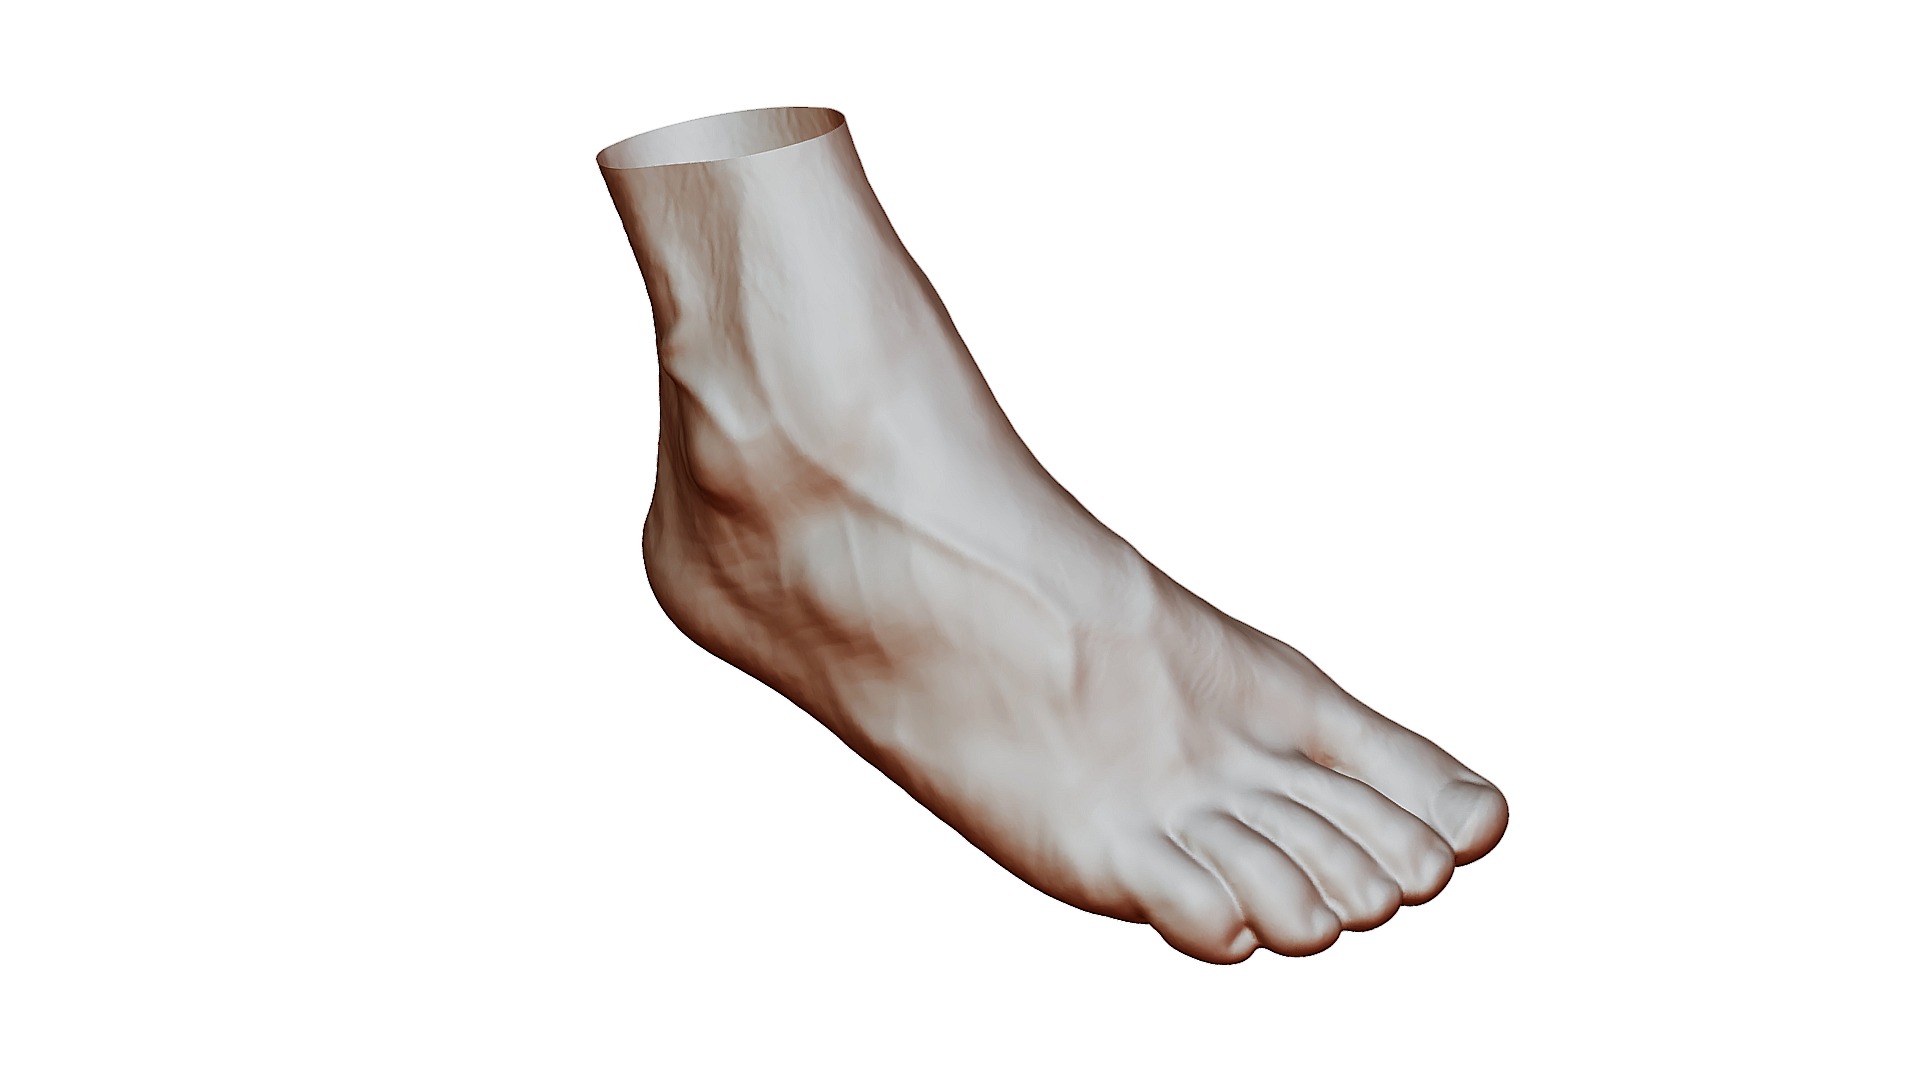 3D model Foot Scanned - This is a 3D model of the Foot Scanned. The 3D model is about a close-up of a foot.